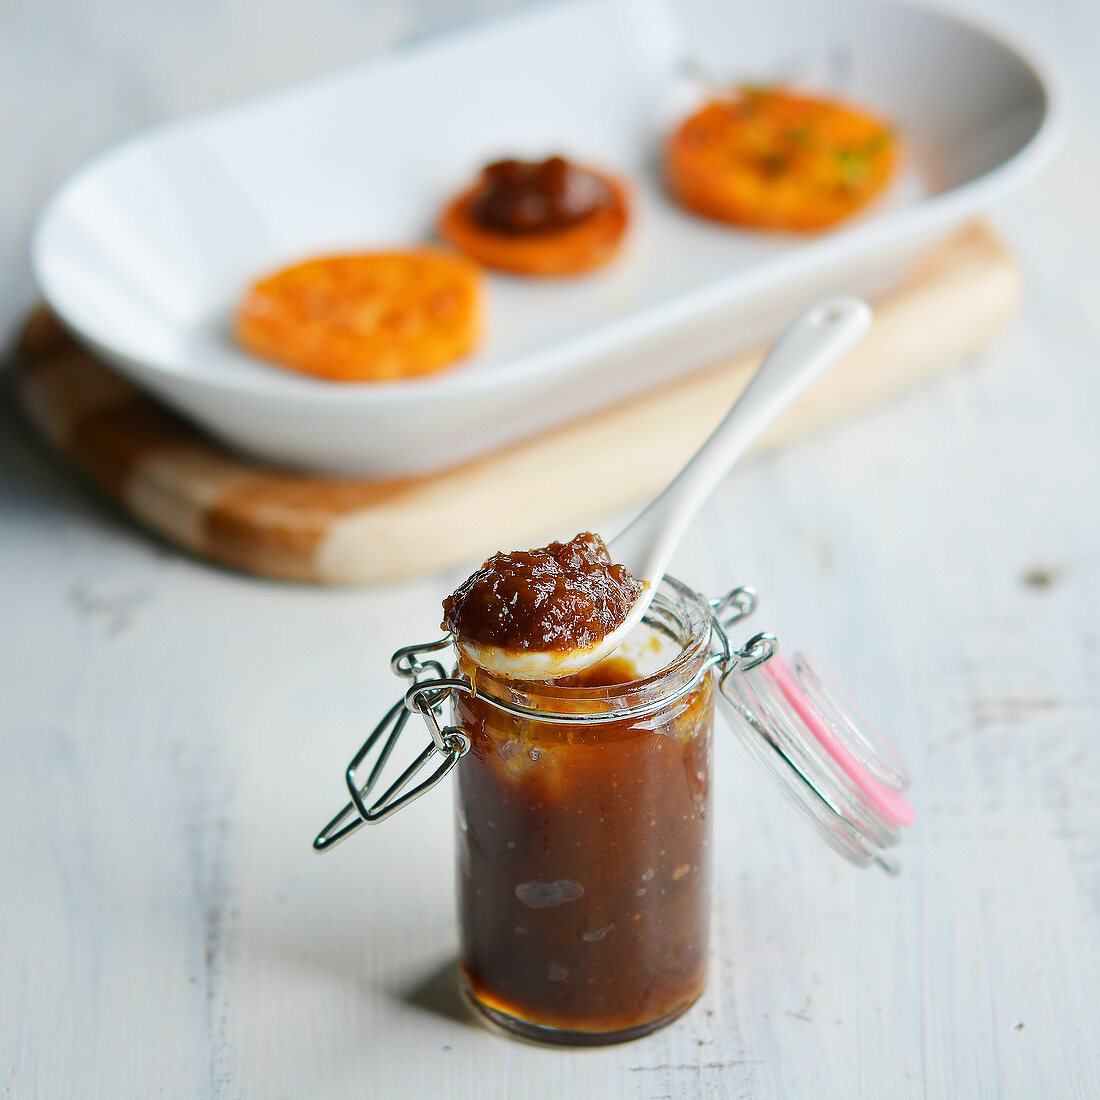 Carrot and onion chutney in a glass and on sweet potato slices